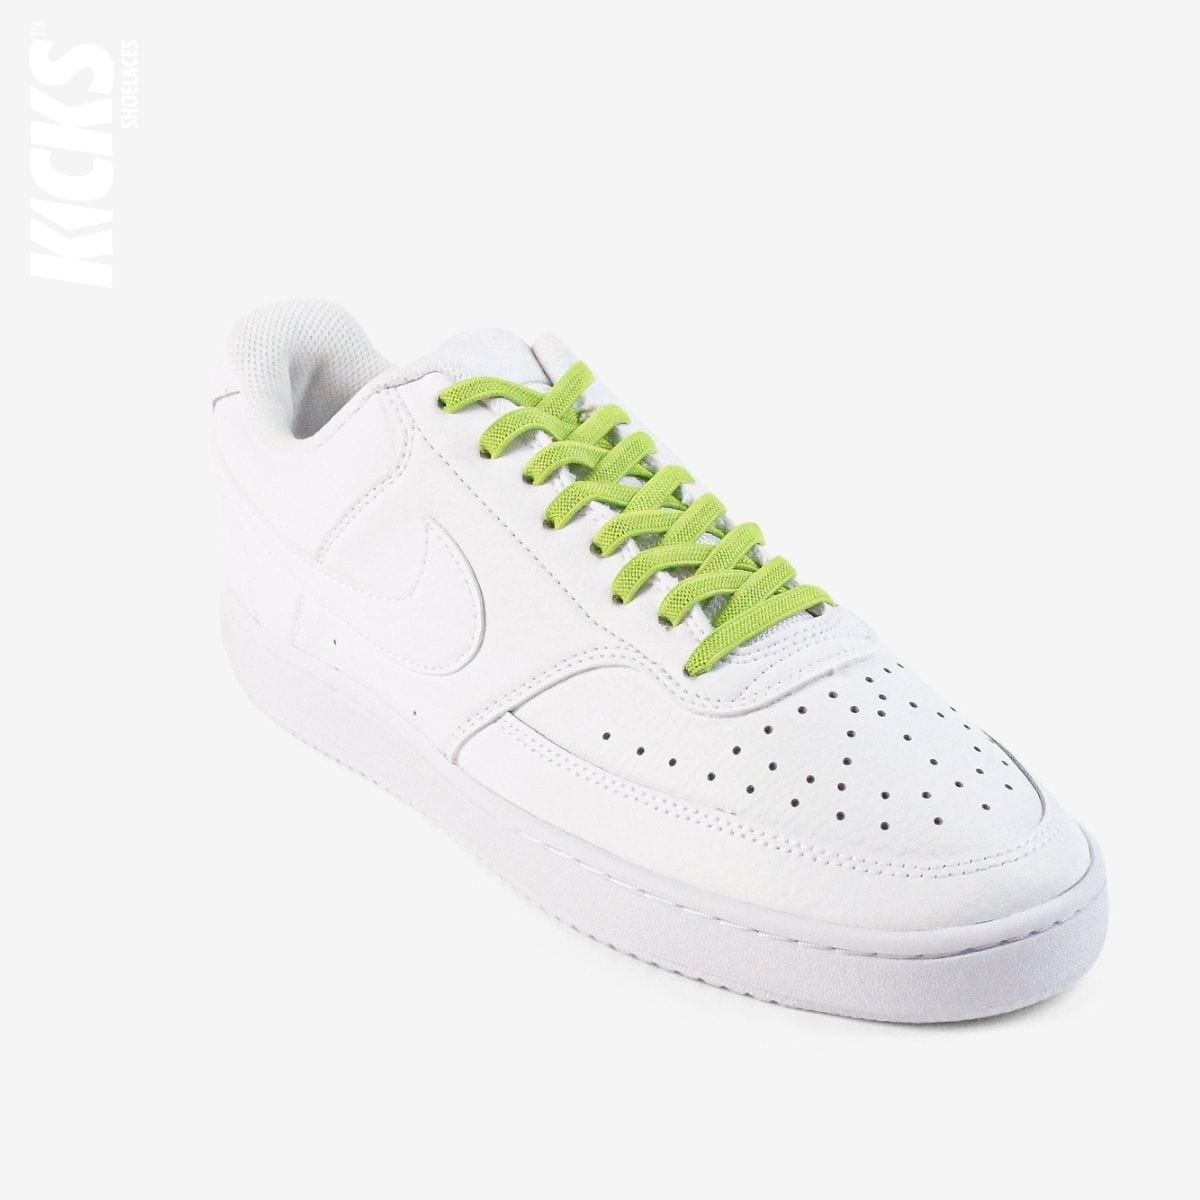 no-tie-shoelaces-with-bright-green-laces-on-nike-white-sneakers-by-kicks-shoelaces